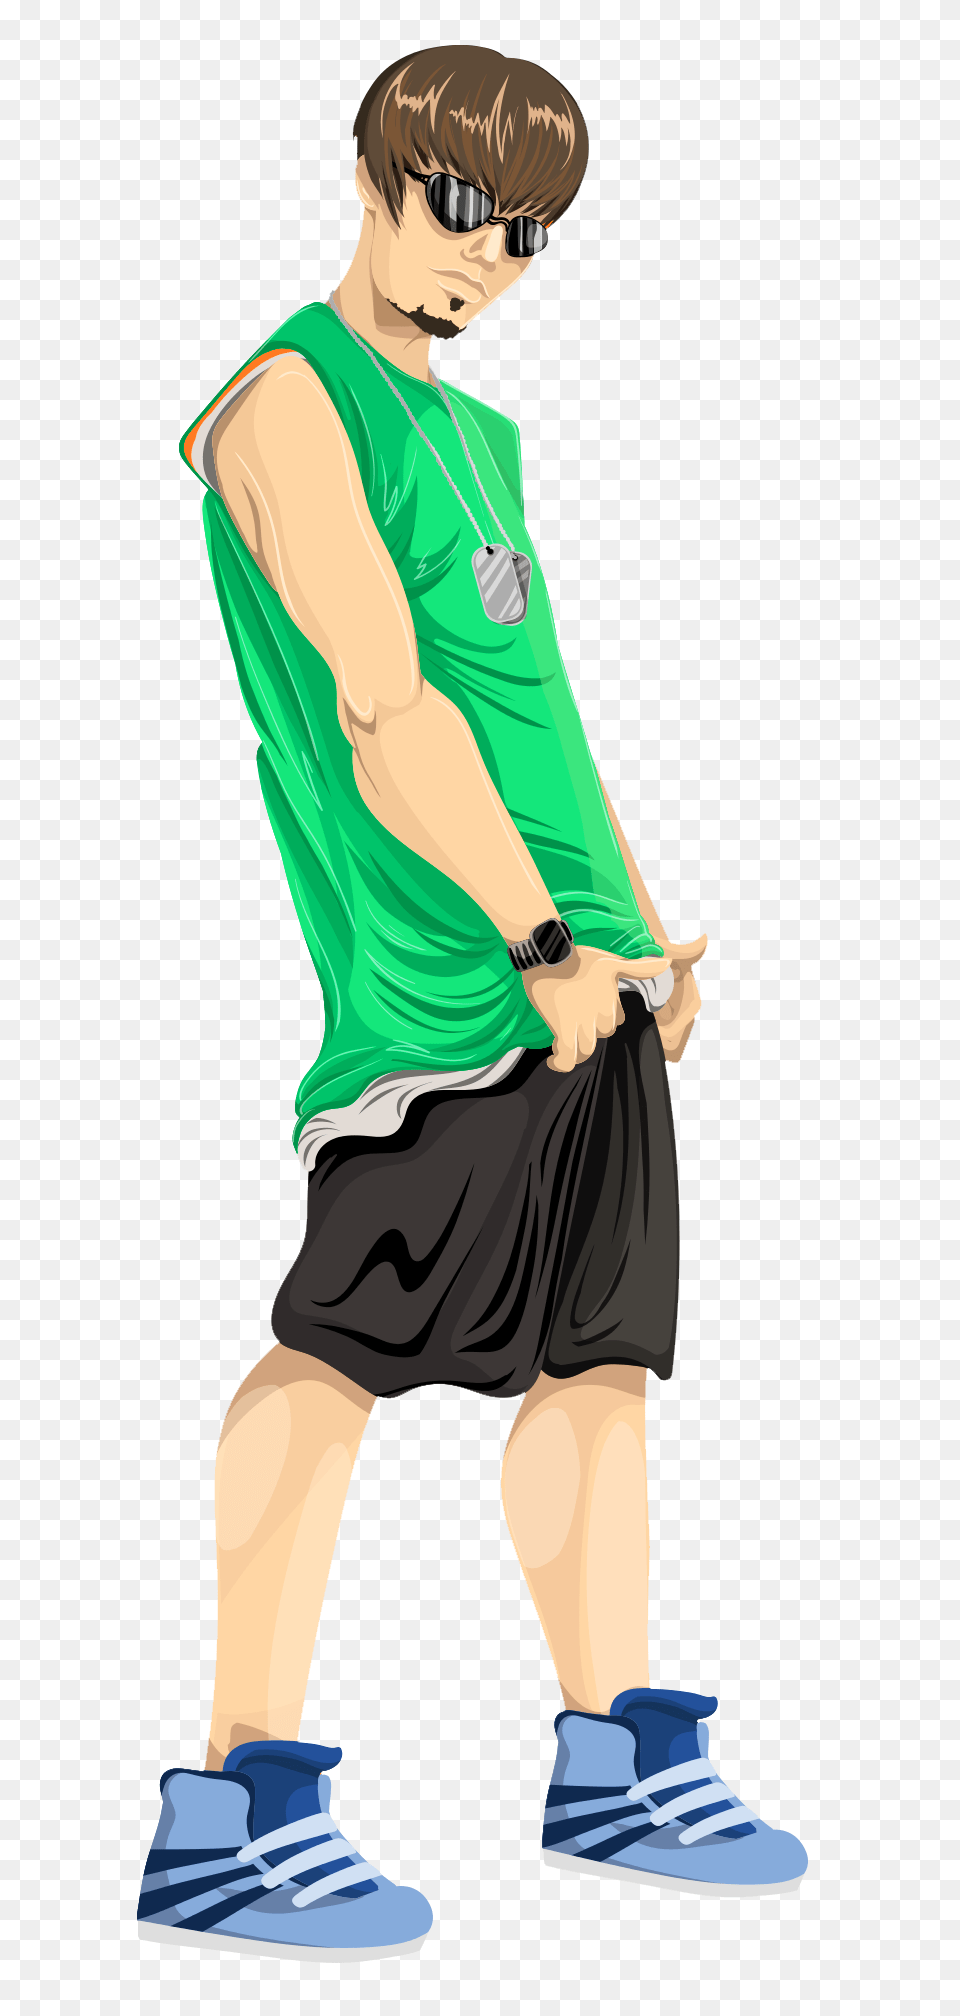 Pngpix Com Boy Standing Vector Clothing, Shorts, Person, Child Png Image